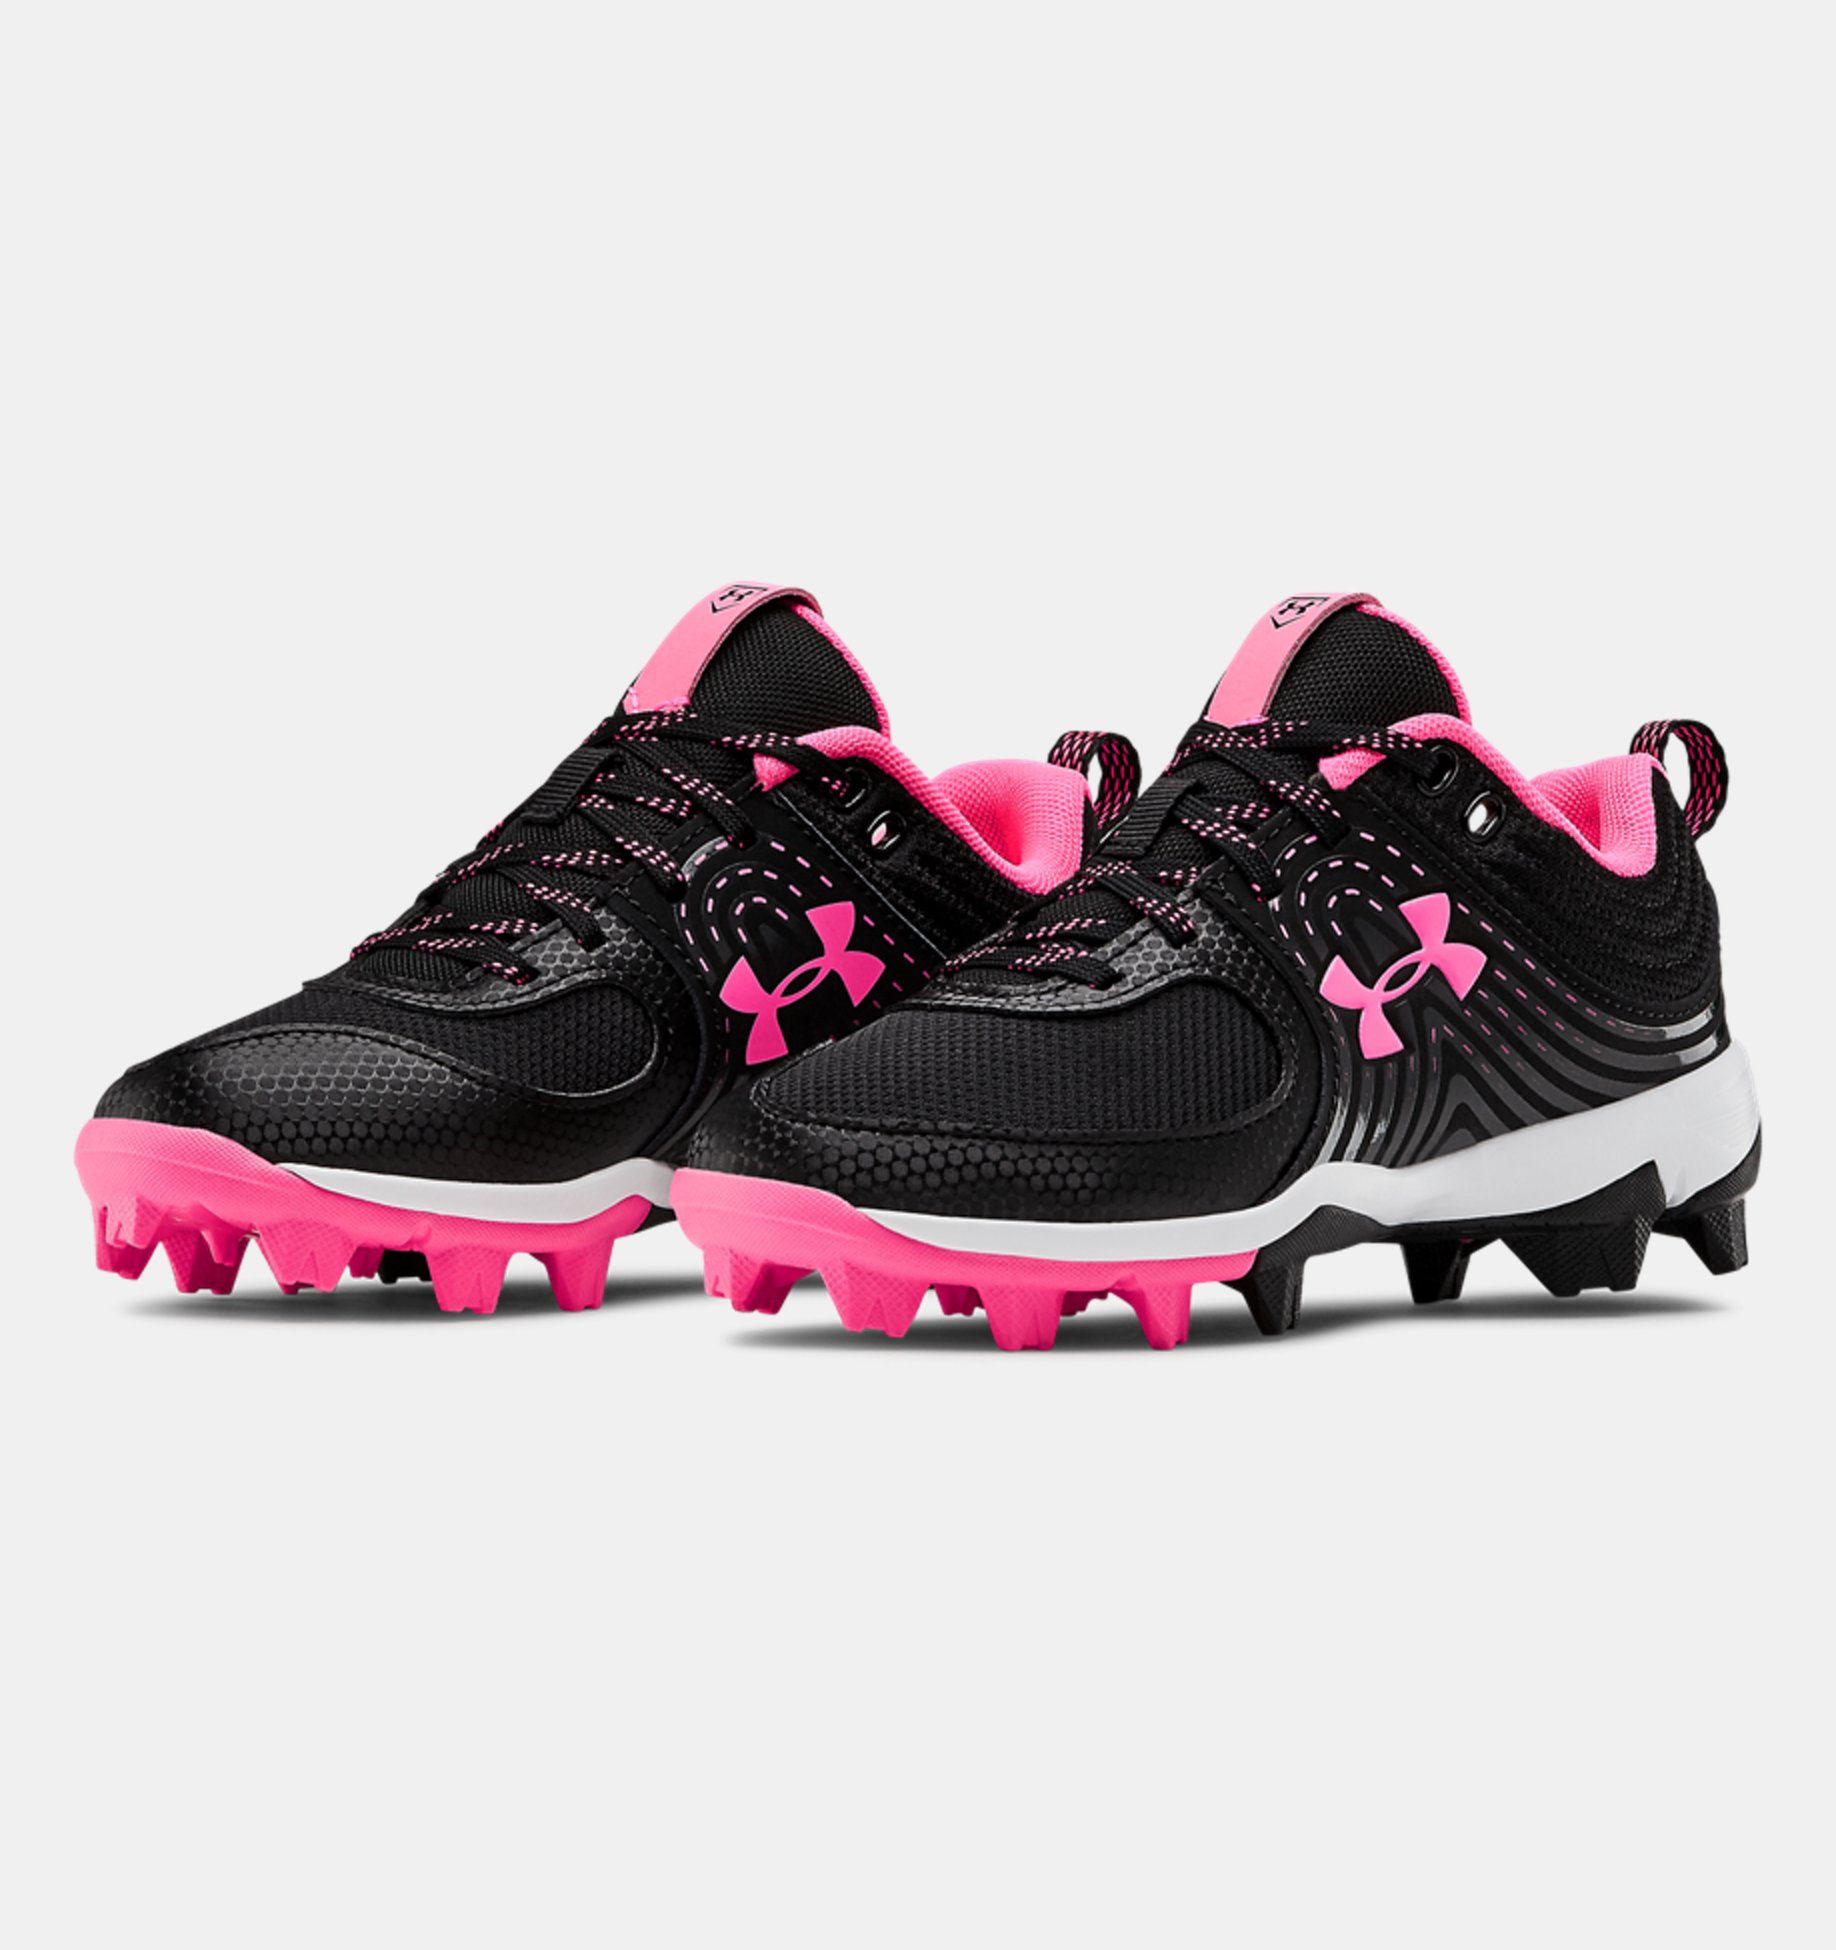 Women's Size 8 NEW Under Armour Womens Glyde RM Softball Cleats Pink/Black 